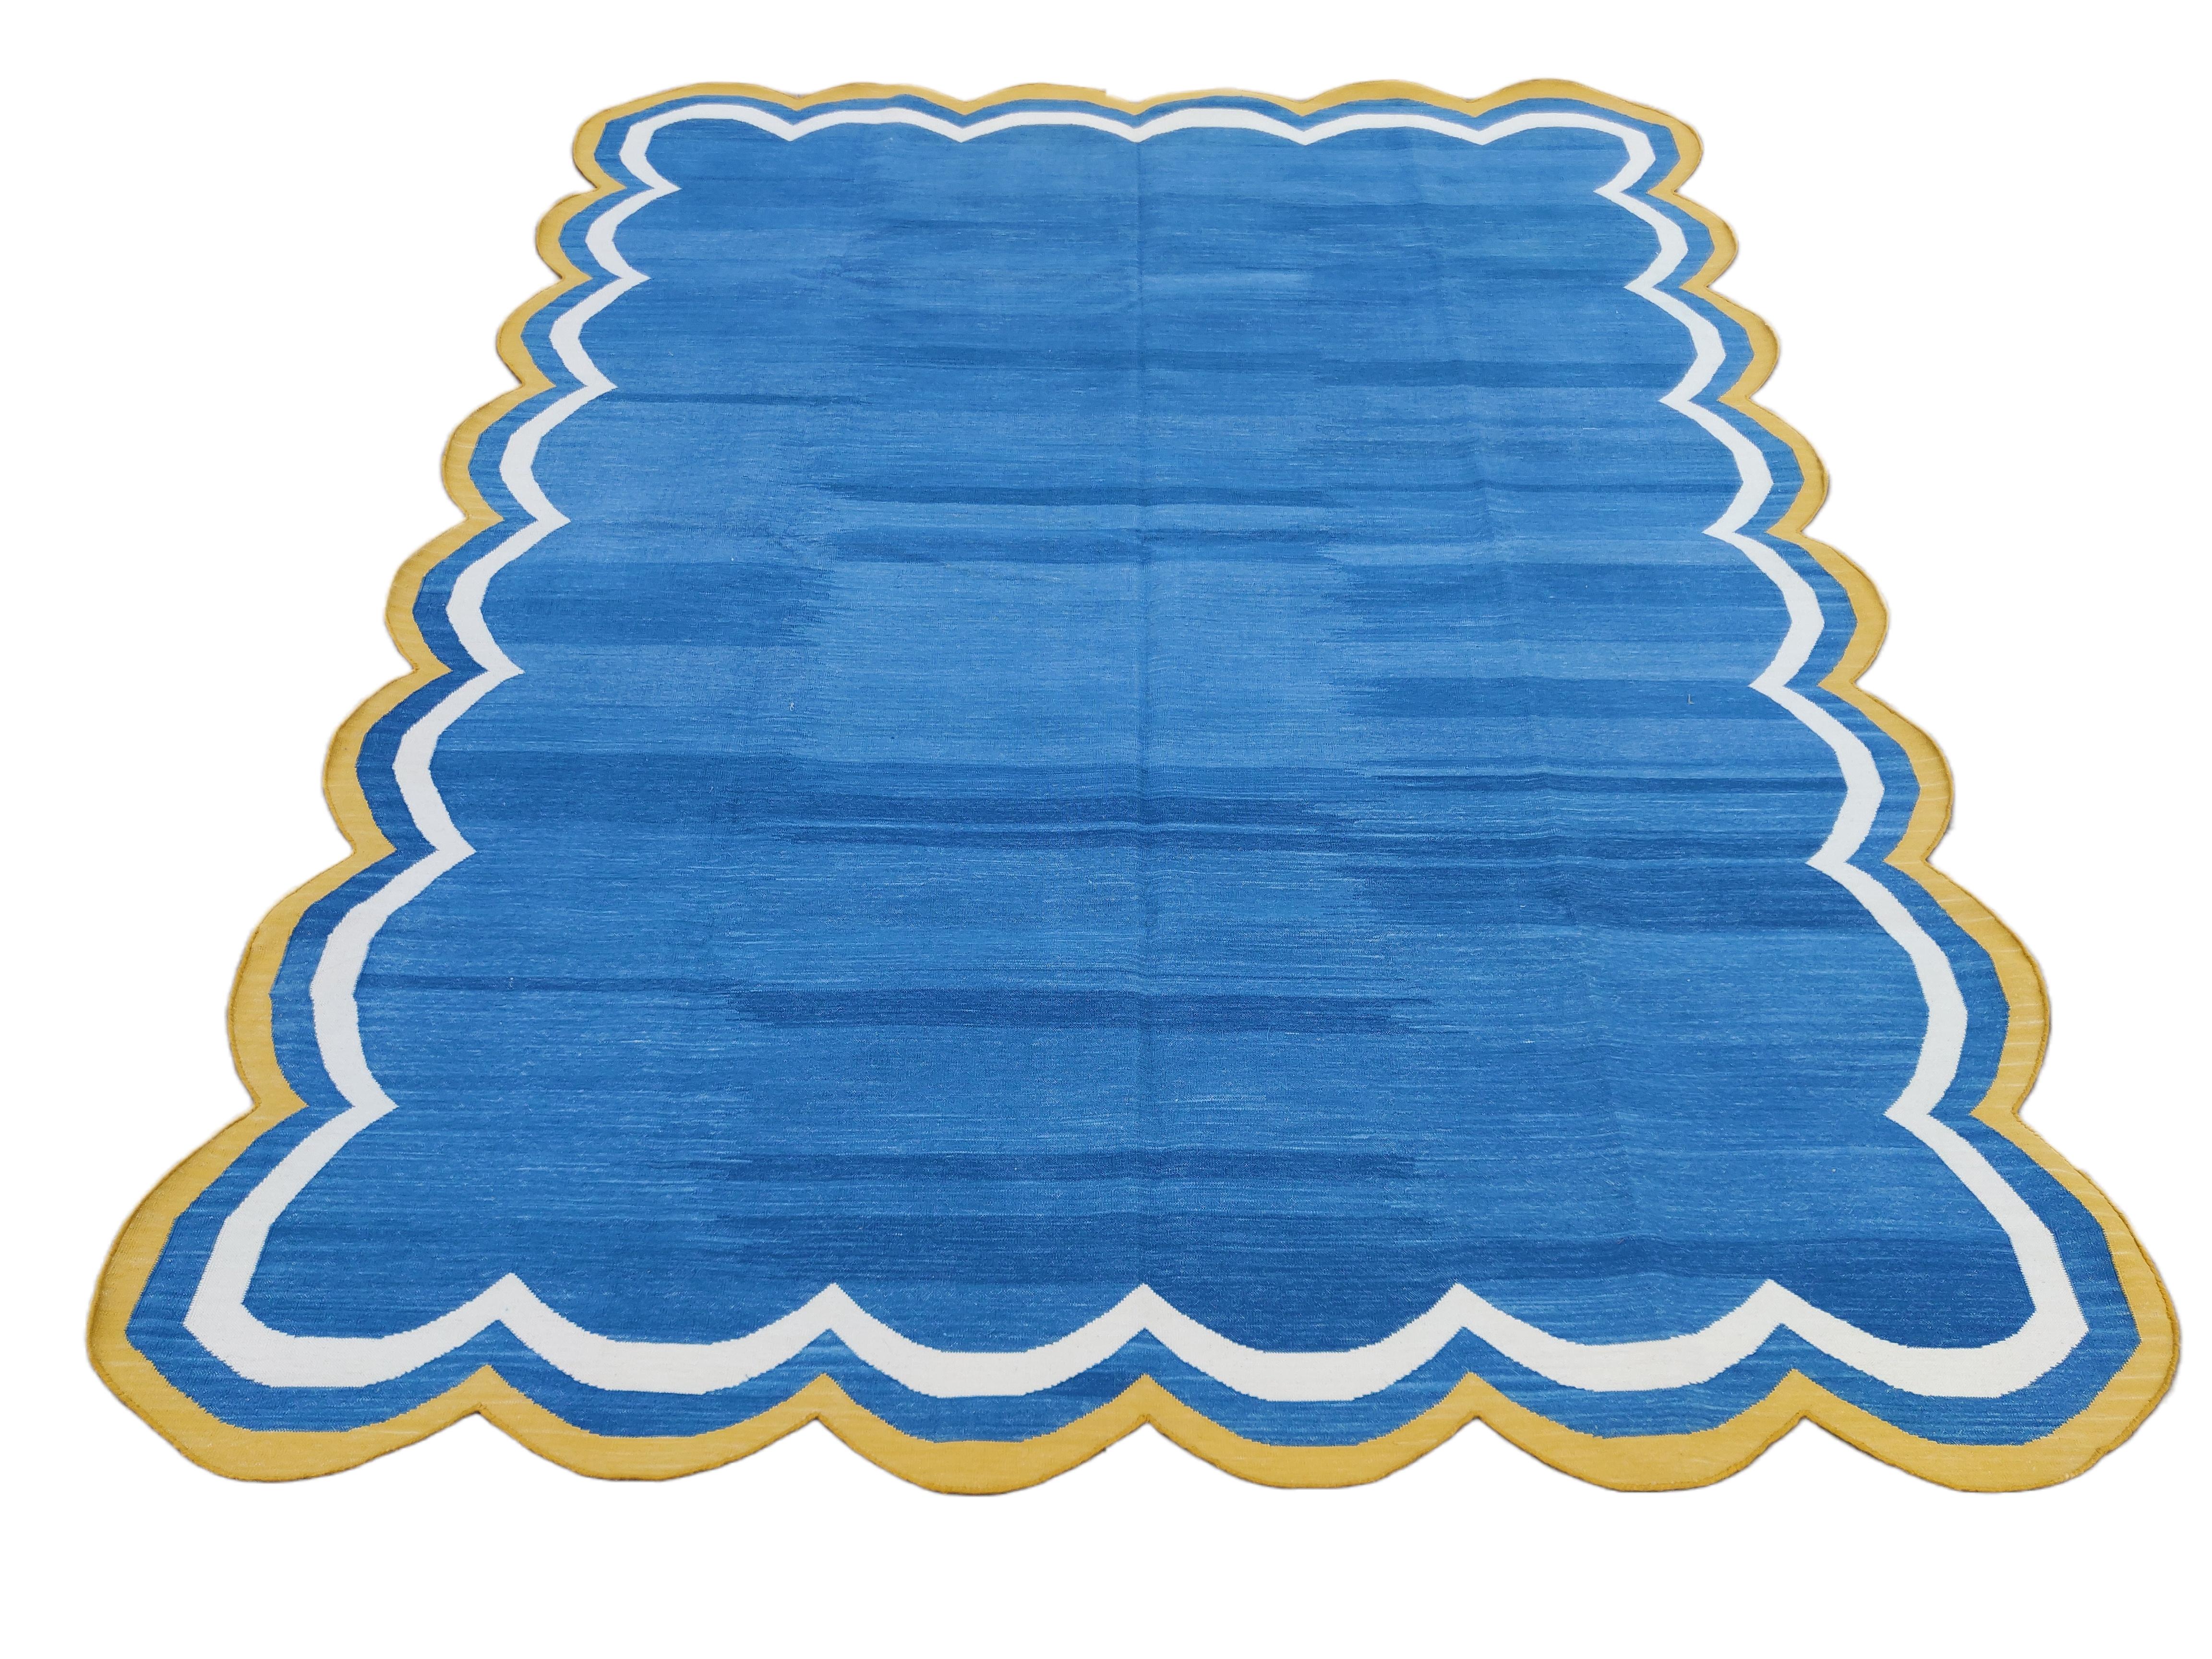 Hand-Woven Handmade Cotton Flat Weave Rug, 8x10 Blue And Yellow Scalloped Indian Dhurrie For Sale